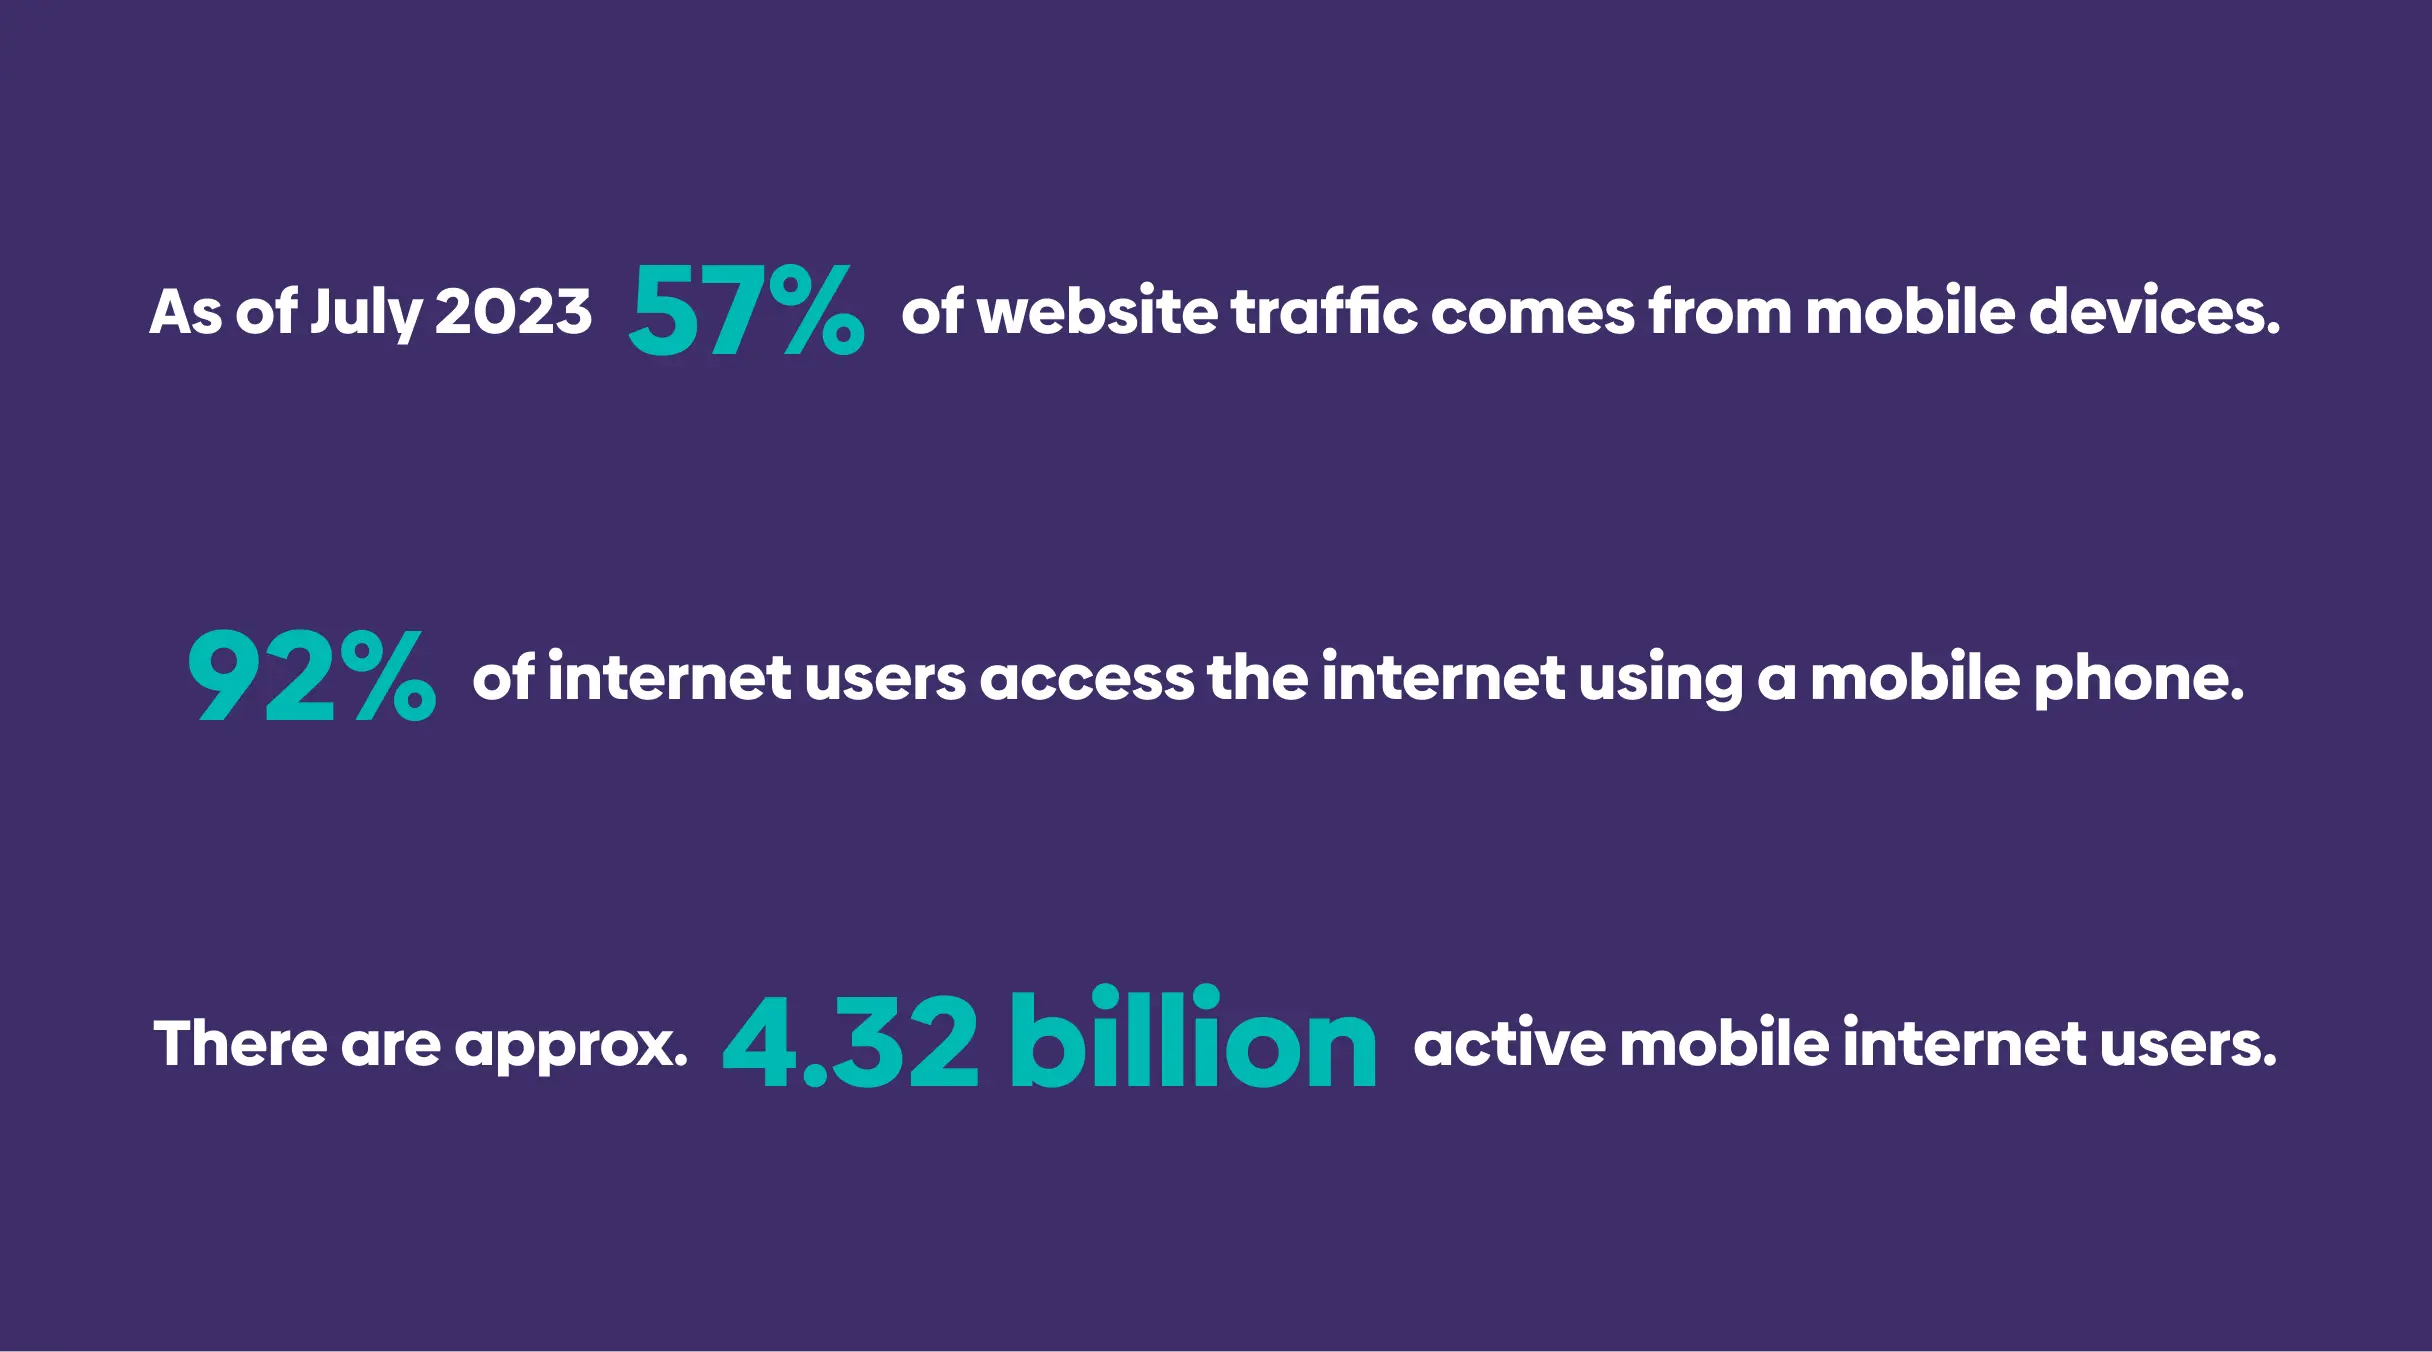 Statistics about mobile web browsing as of July 2023